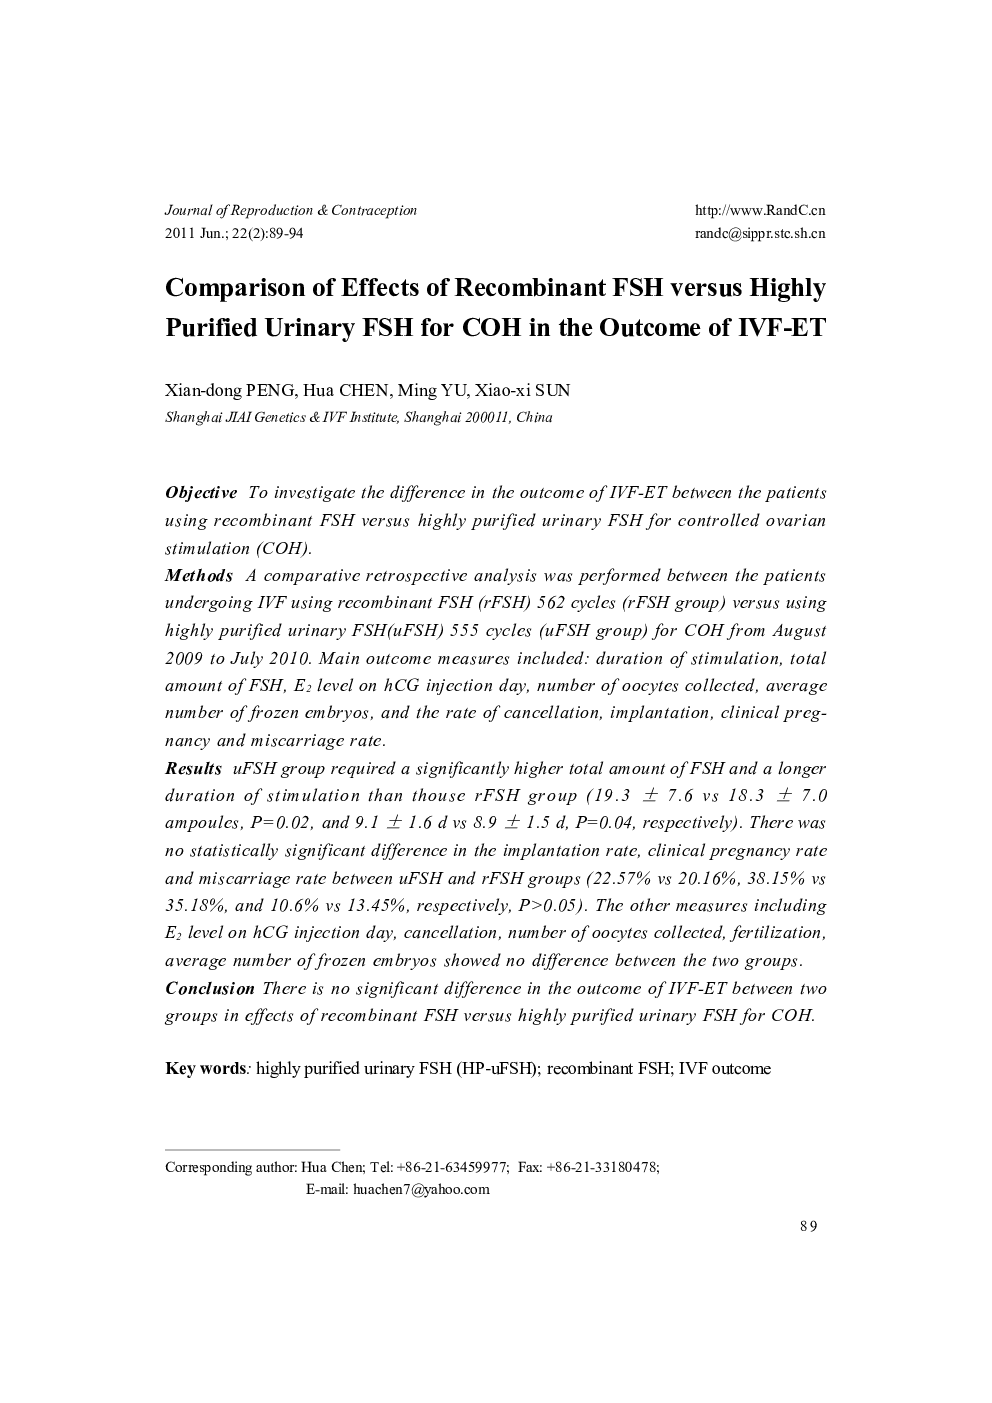 Comparison of Effects of Recombinant FSH versus Highly Purified Urinary FSH for COH in the Outcome of IVF-ET